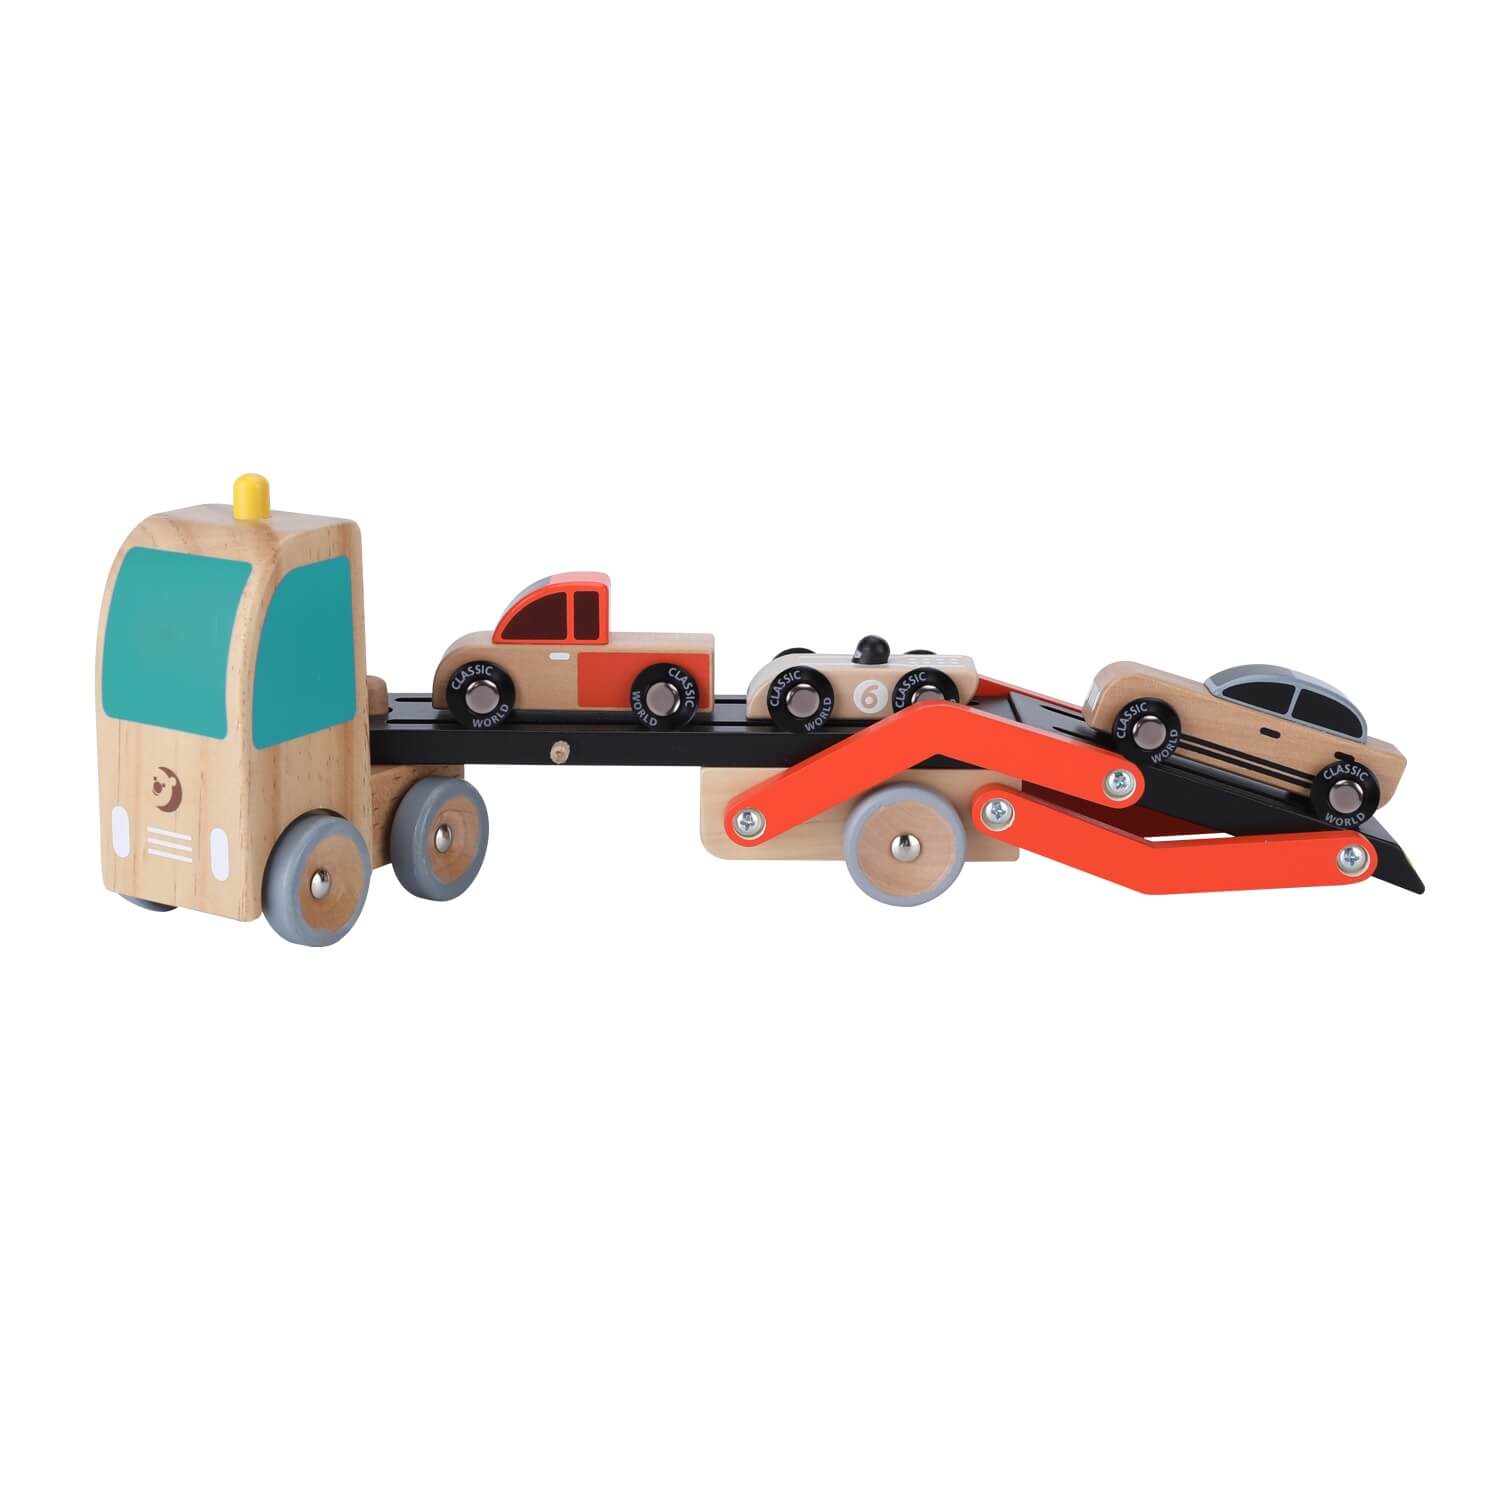 Transport vehicles to their destination with this wooden car transporter. The set features a ramp that lowers for loading cars and lifts to create a double-decker truck.